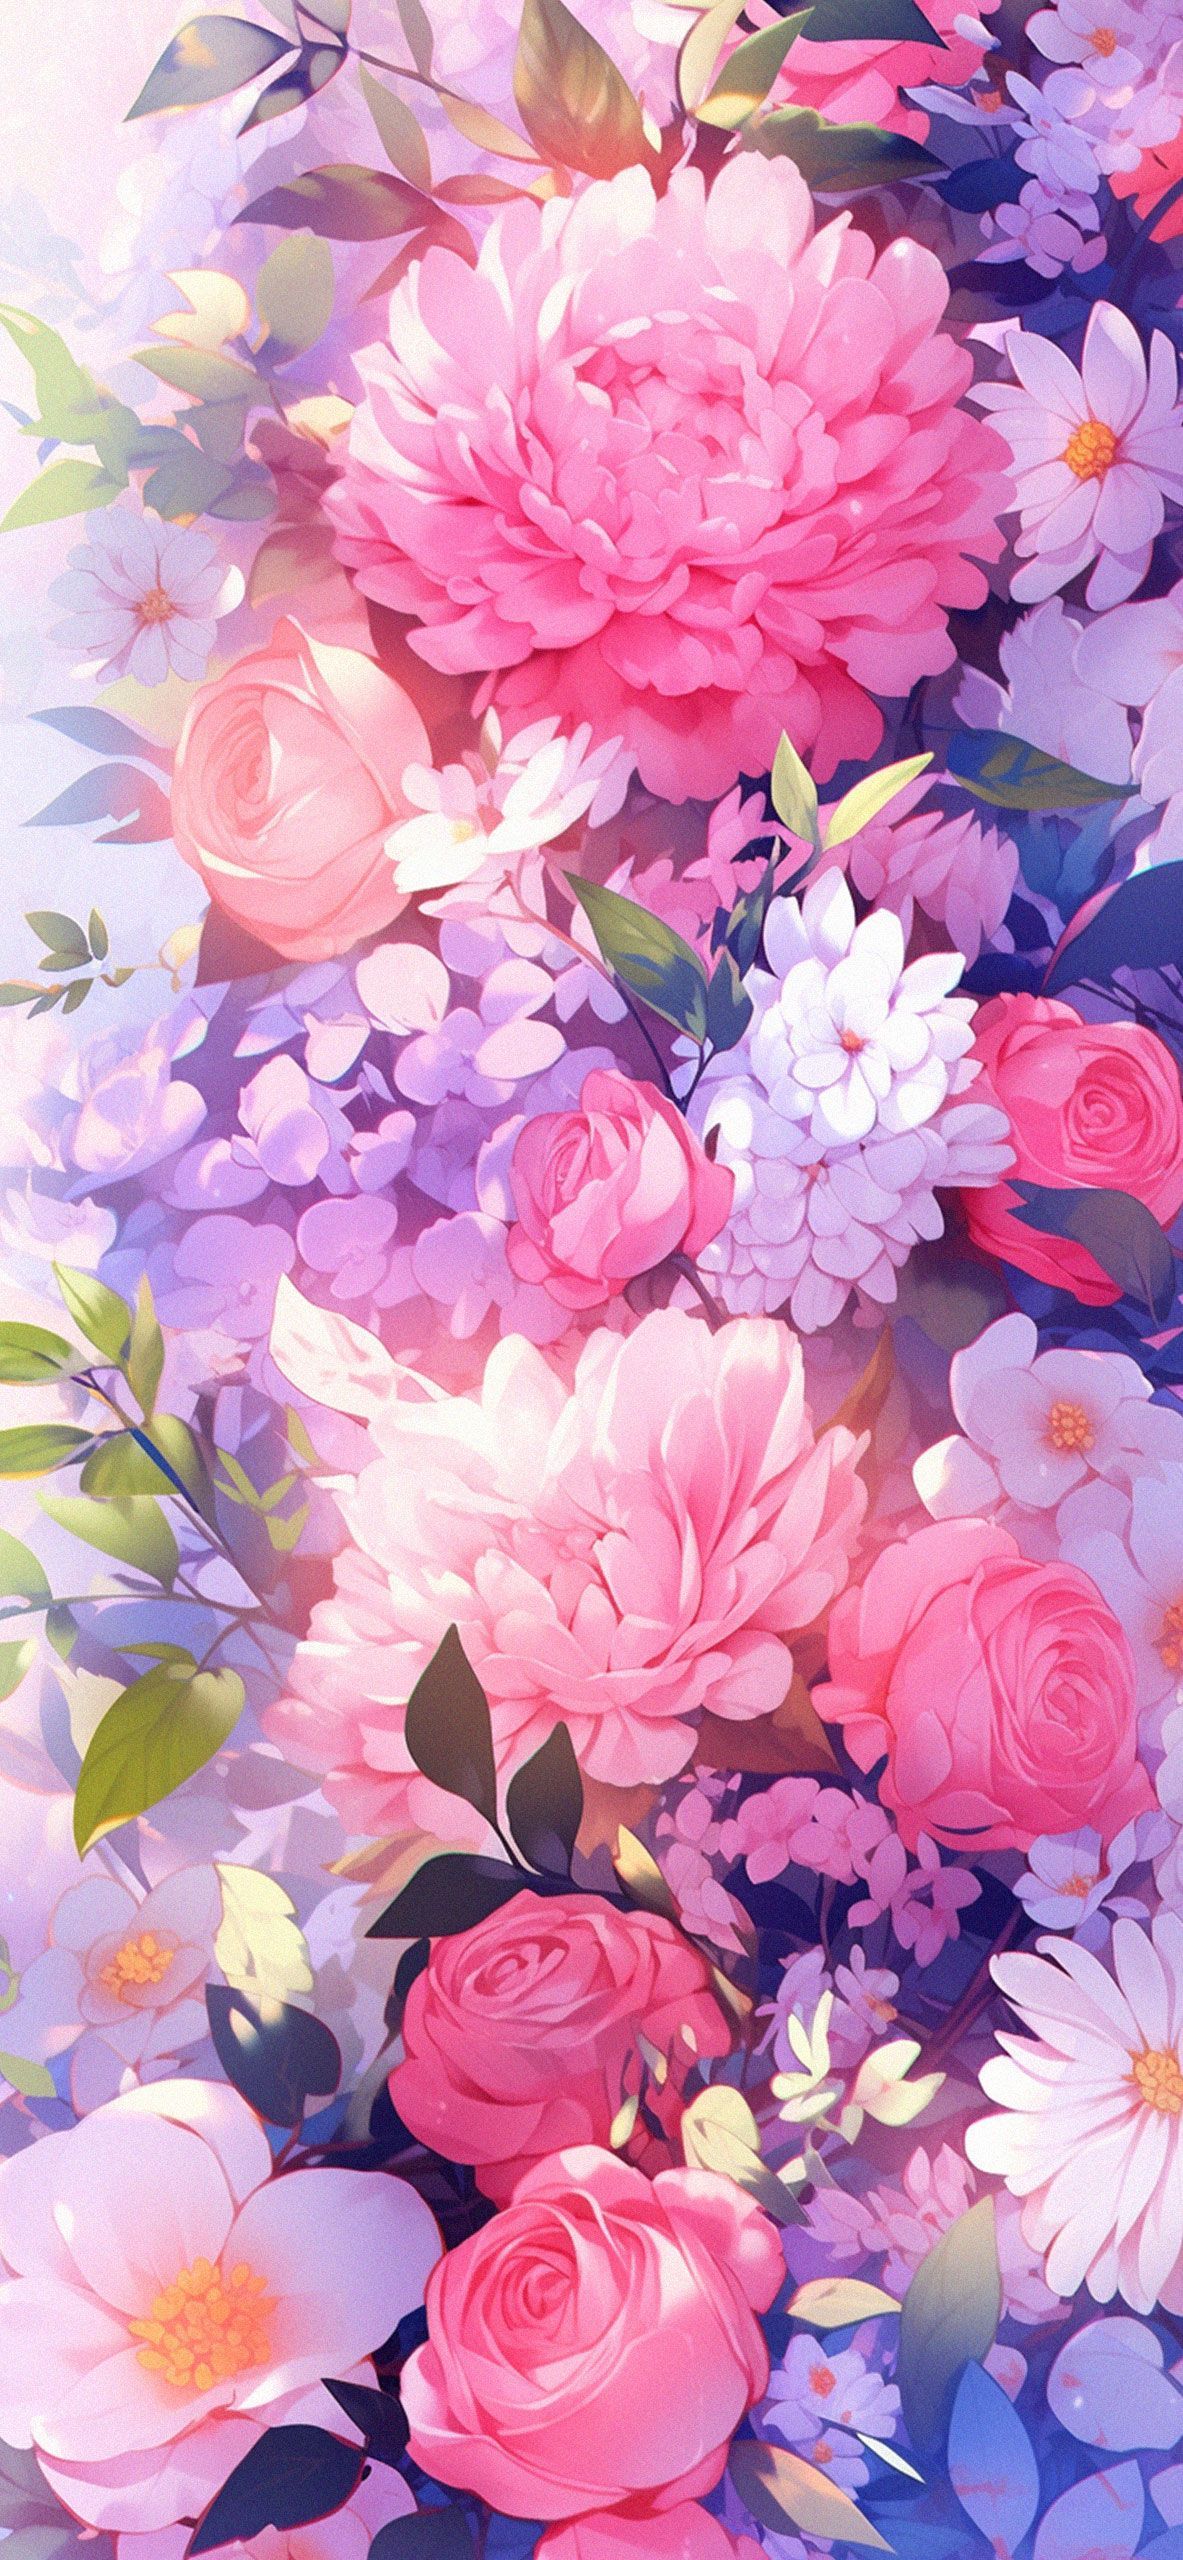 IPhone wallpaper with beautiful flowers. - Spring, roses